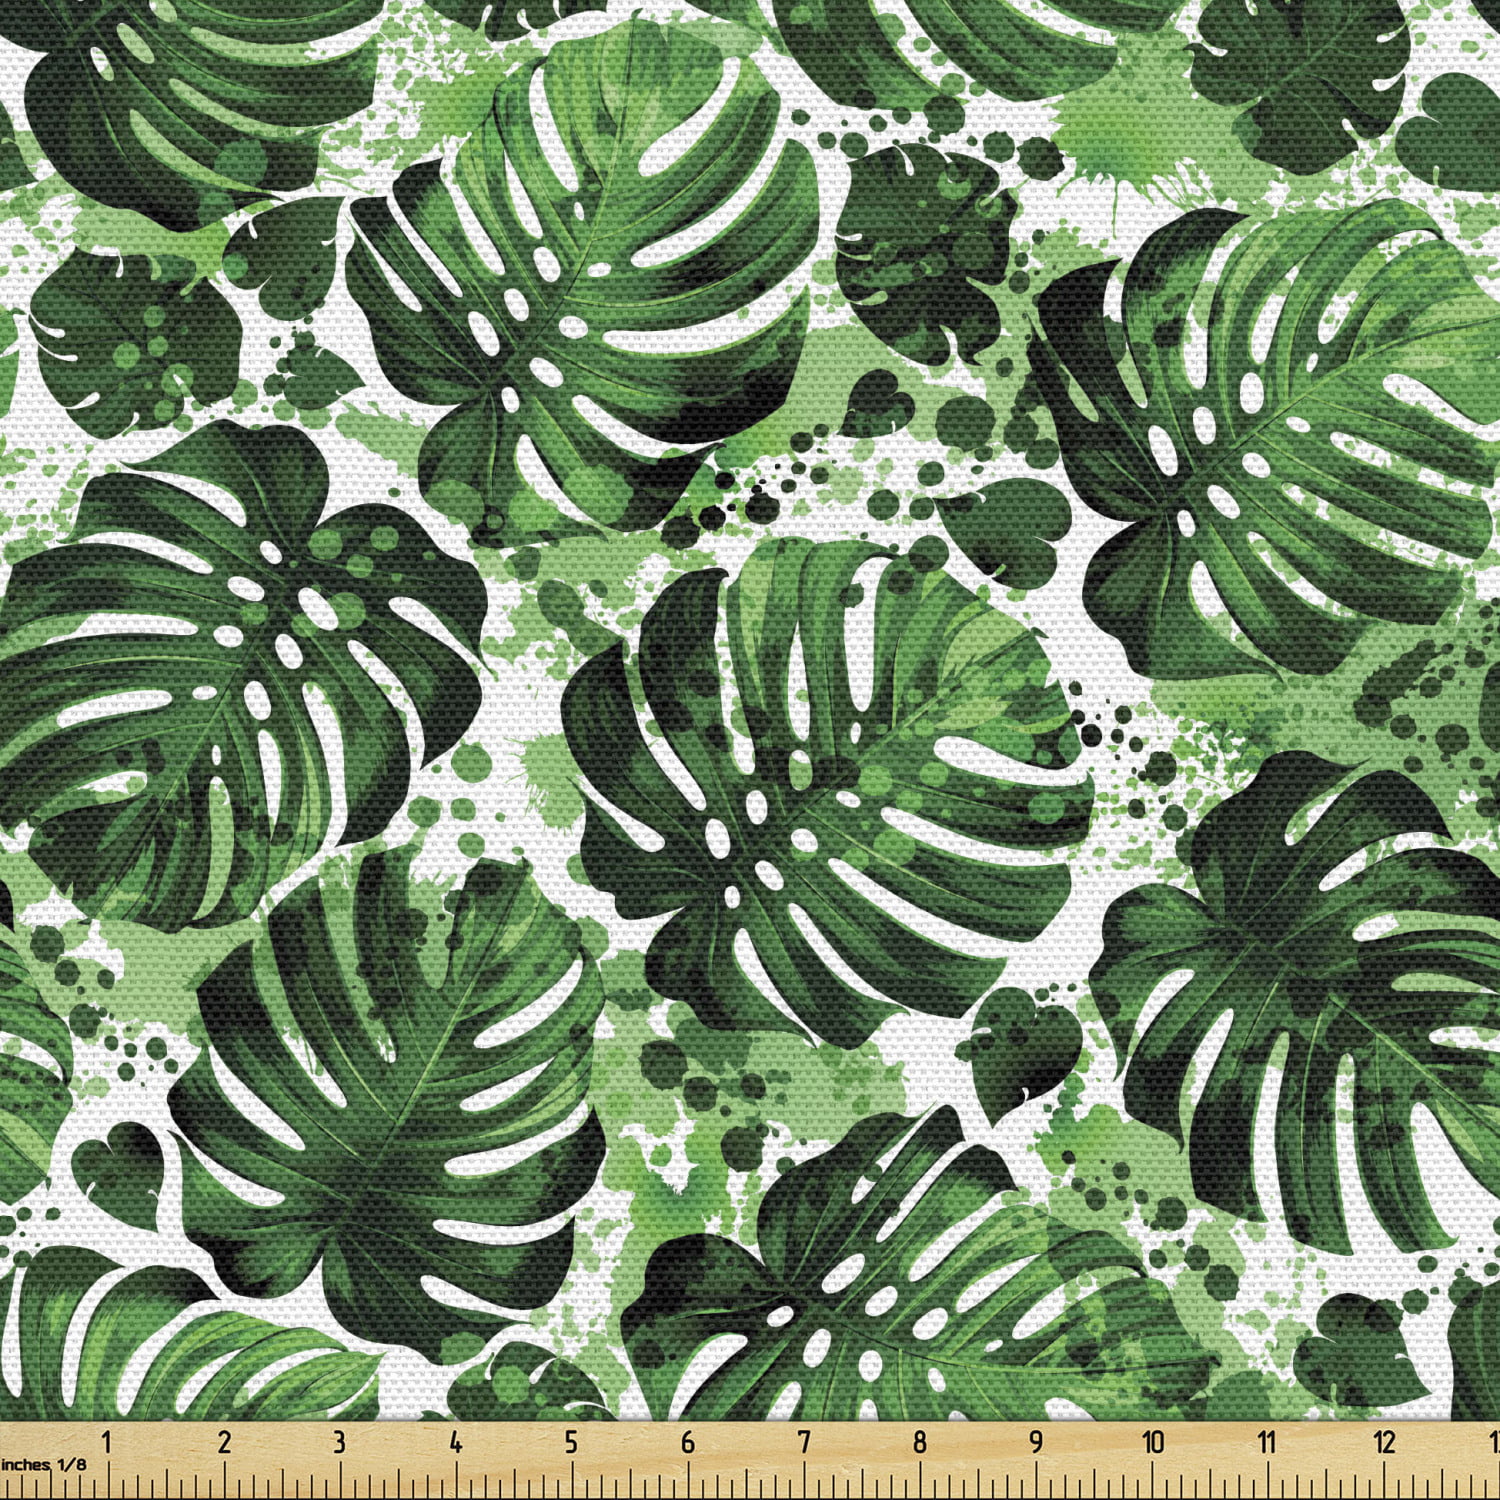 CAICOS - MODERN WOVEN TROPICAL PATTERN UPHOLSTERY FABRIC BY THE YARD